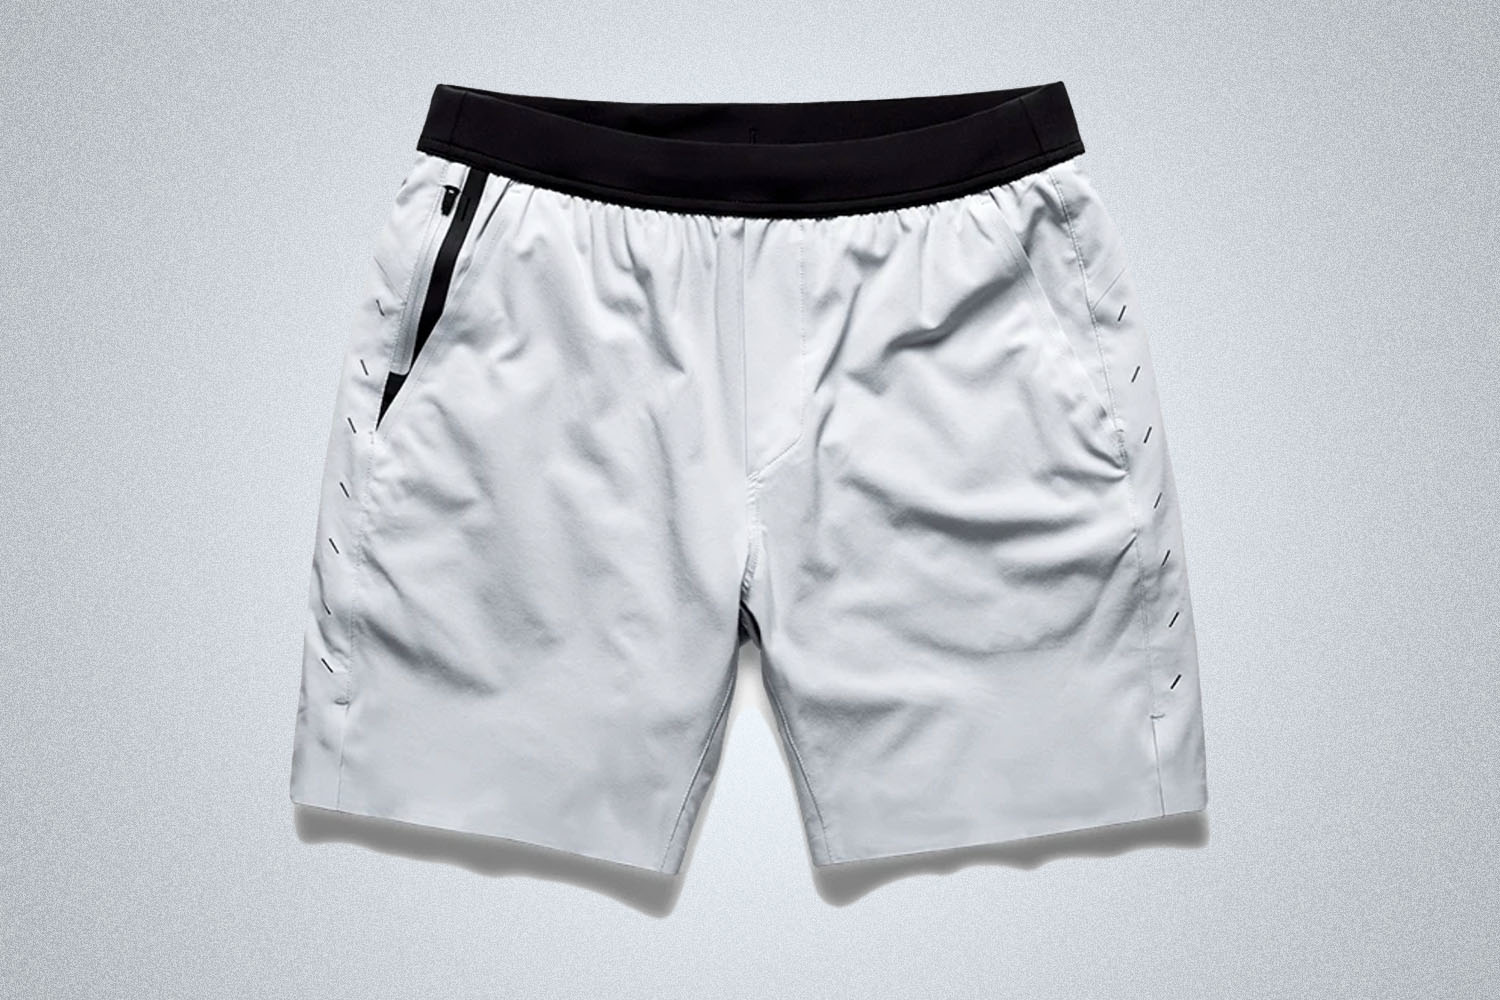 A pair of white athletic shorts 